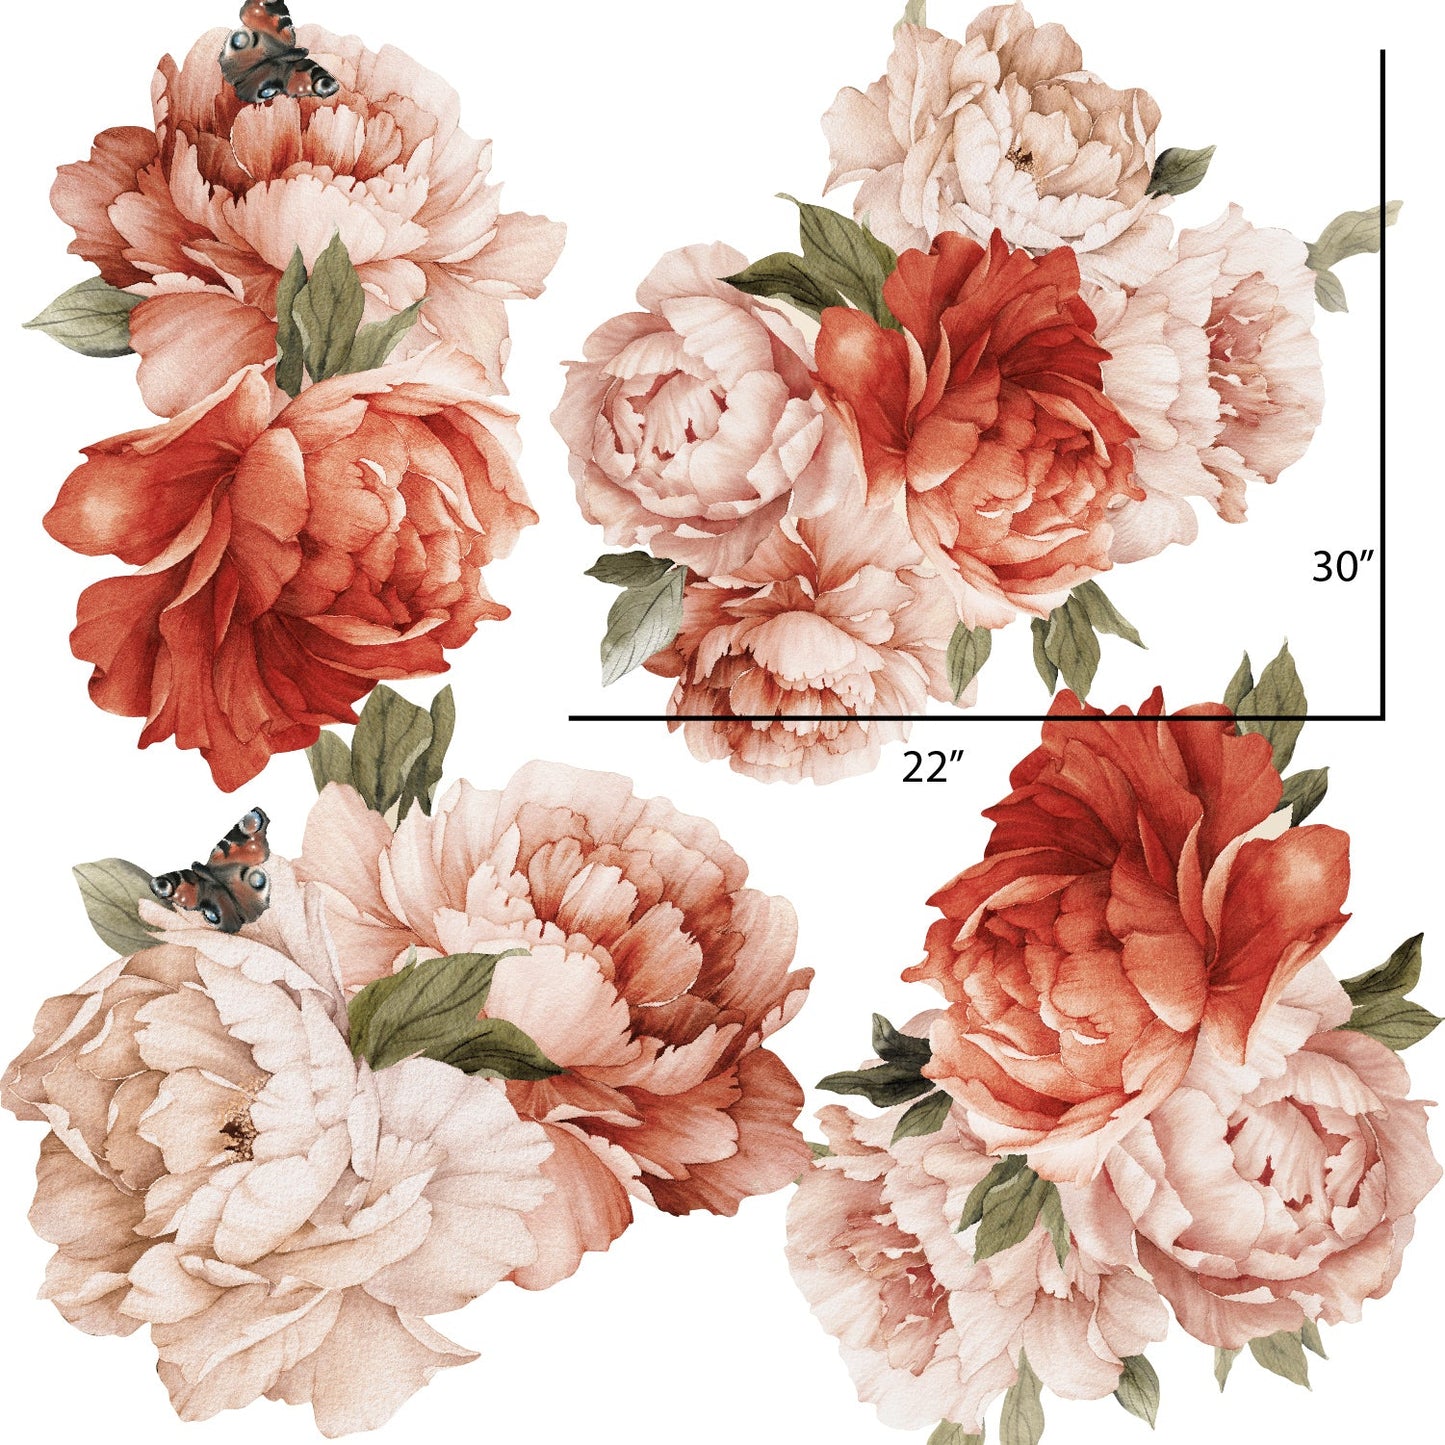 Peonies Wall Decals Vintage Floral Wallpaper Stickers | Coral - Picture Perfect Decals